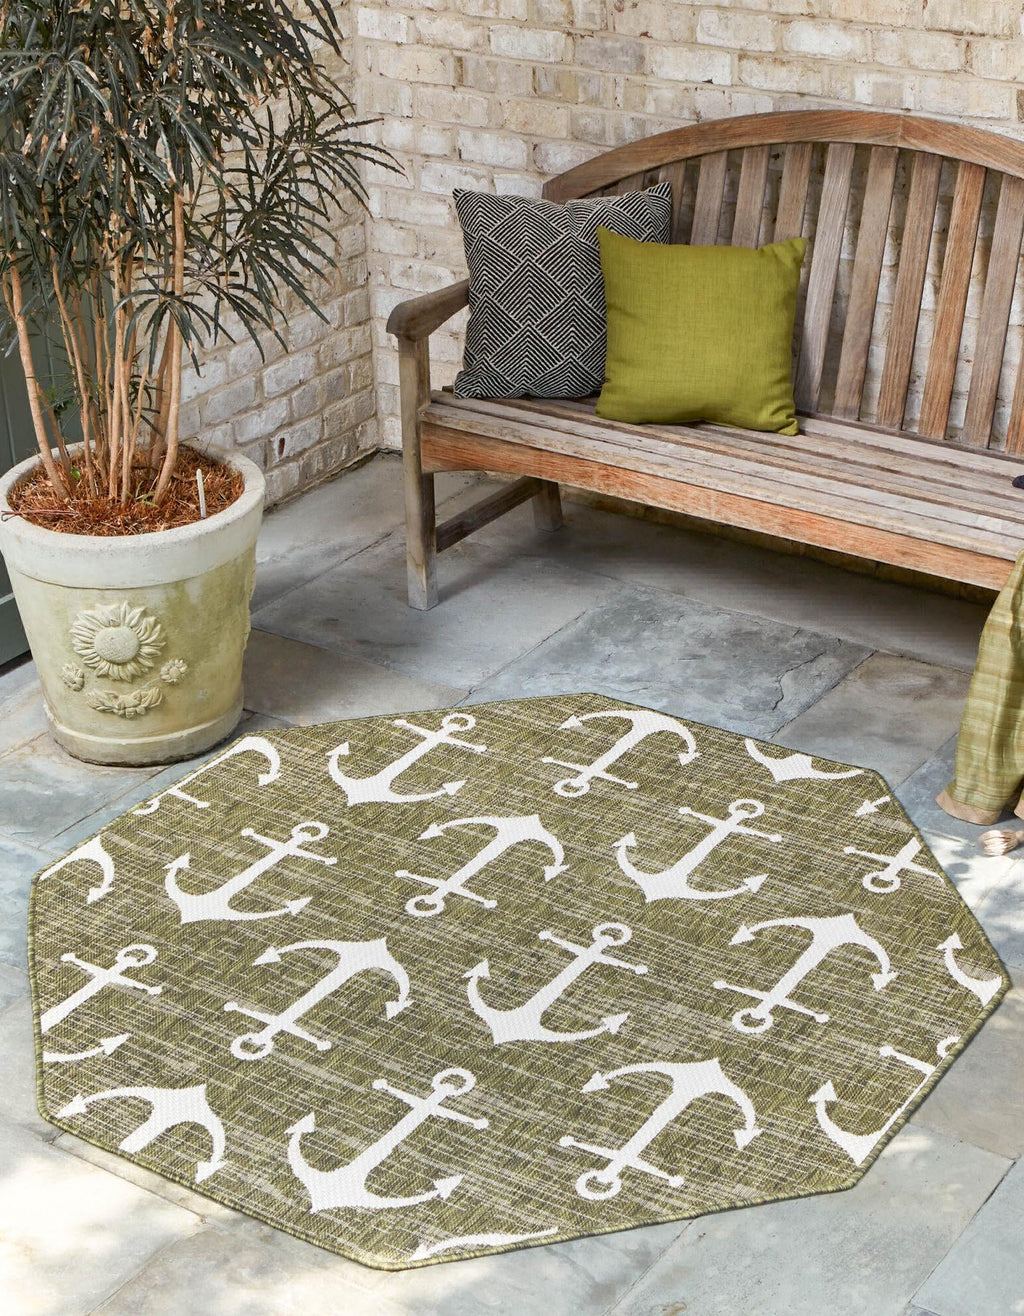 Unique Loom Outdoor Coastal T-KZOD20 Green Area Rug Octagon Lifestyle Image Feature